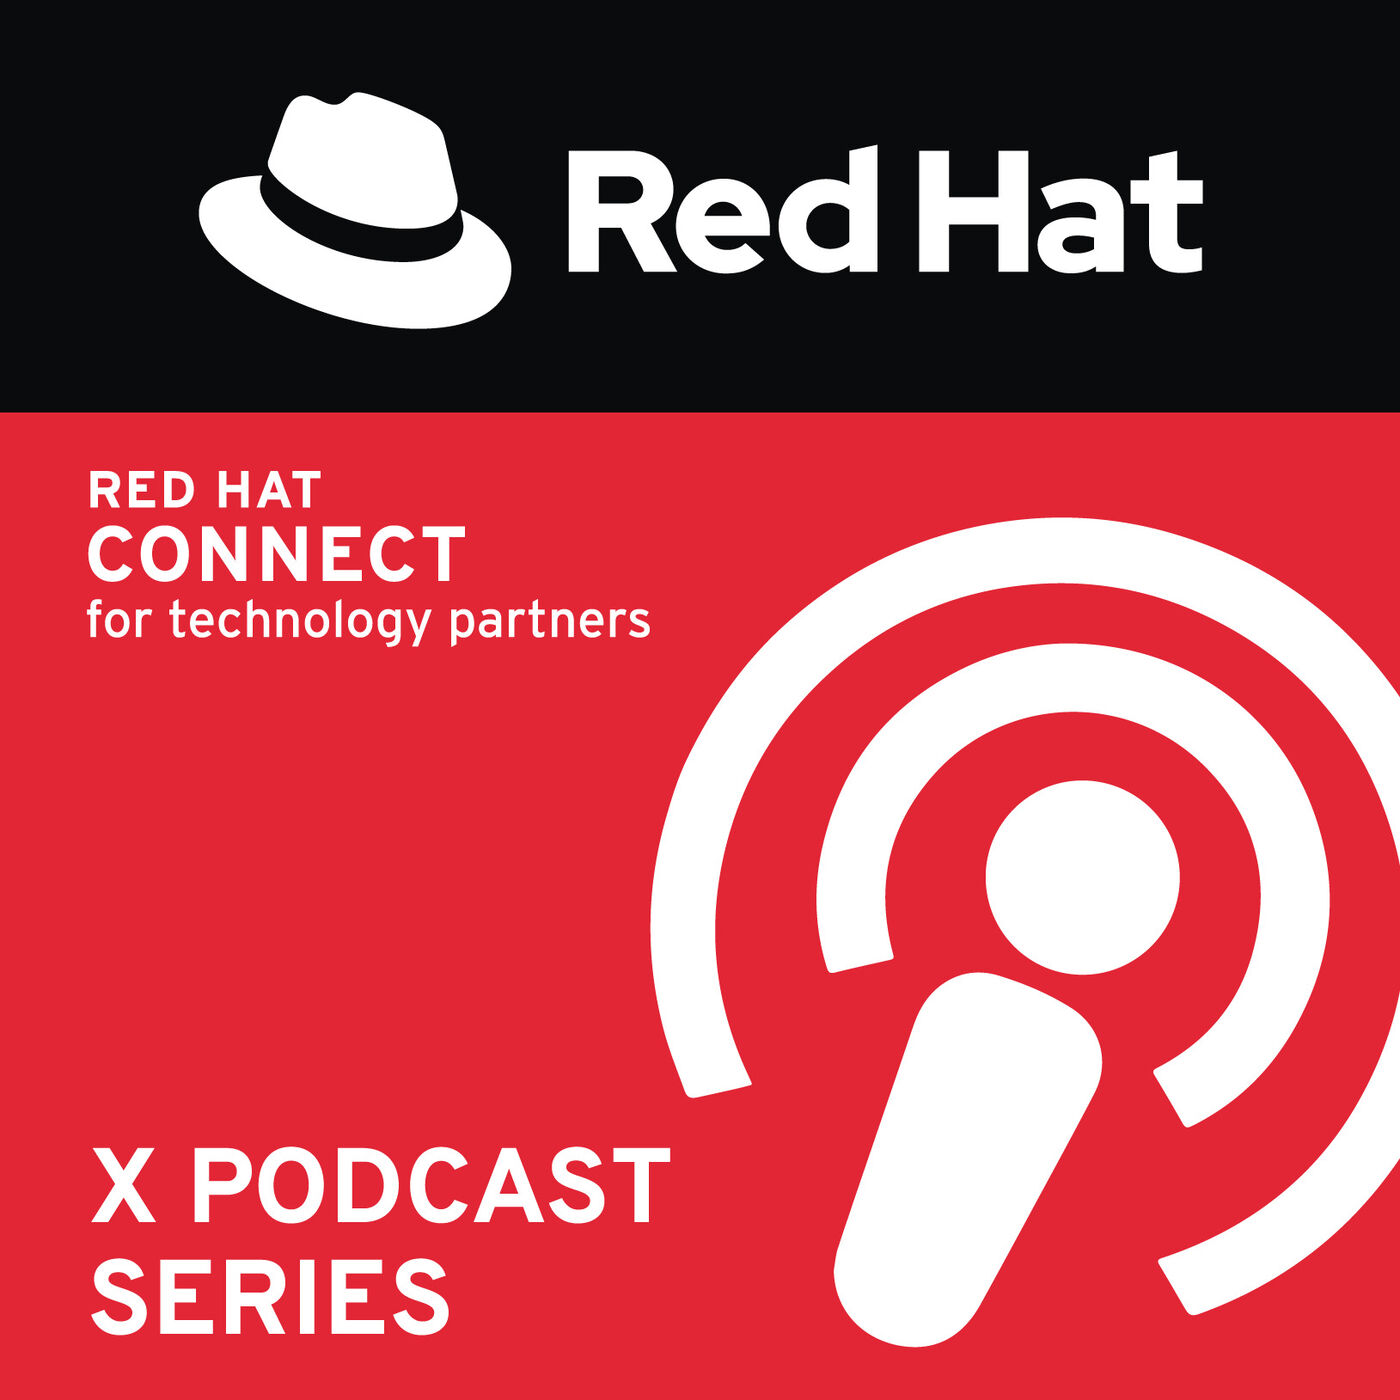 Red Had X Podcast Series